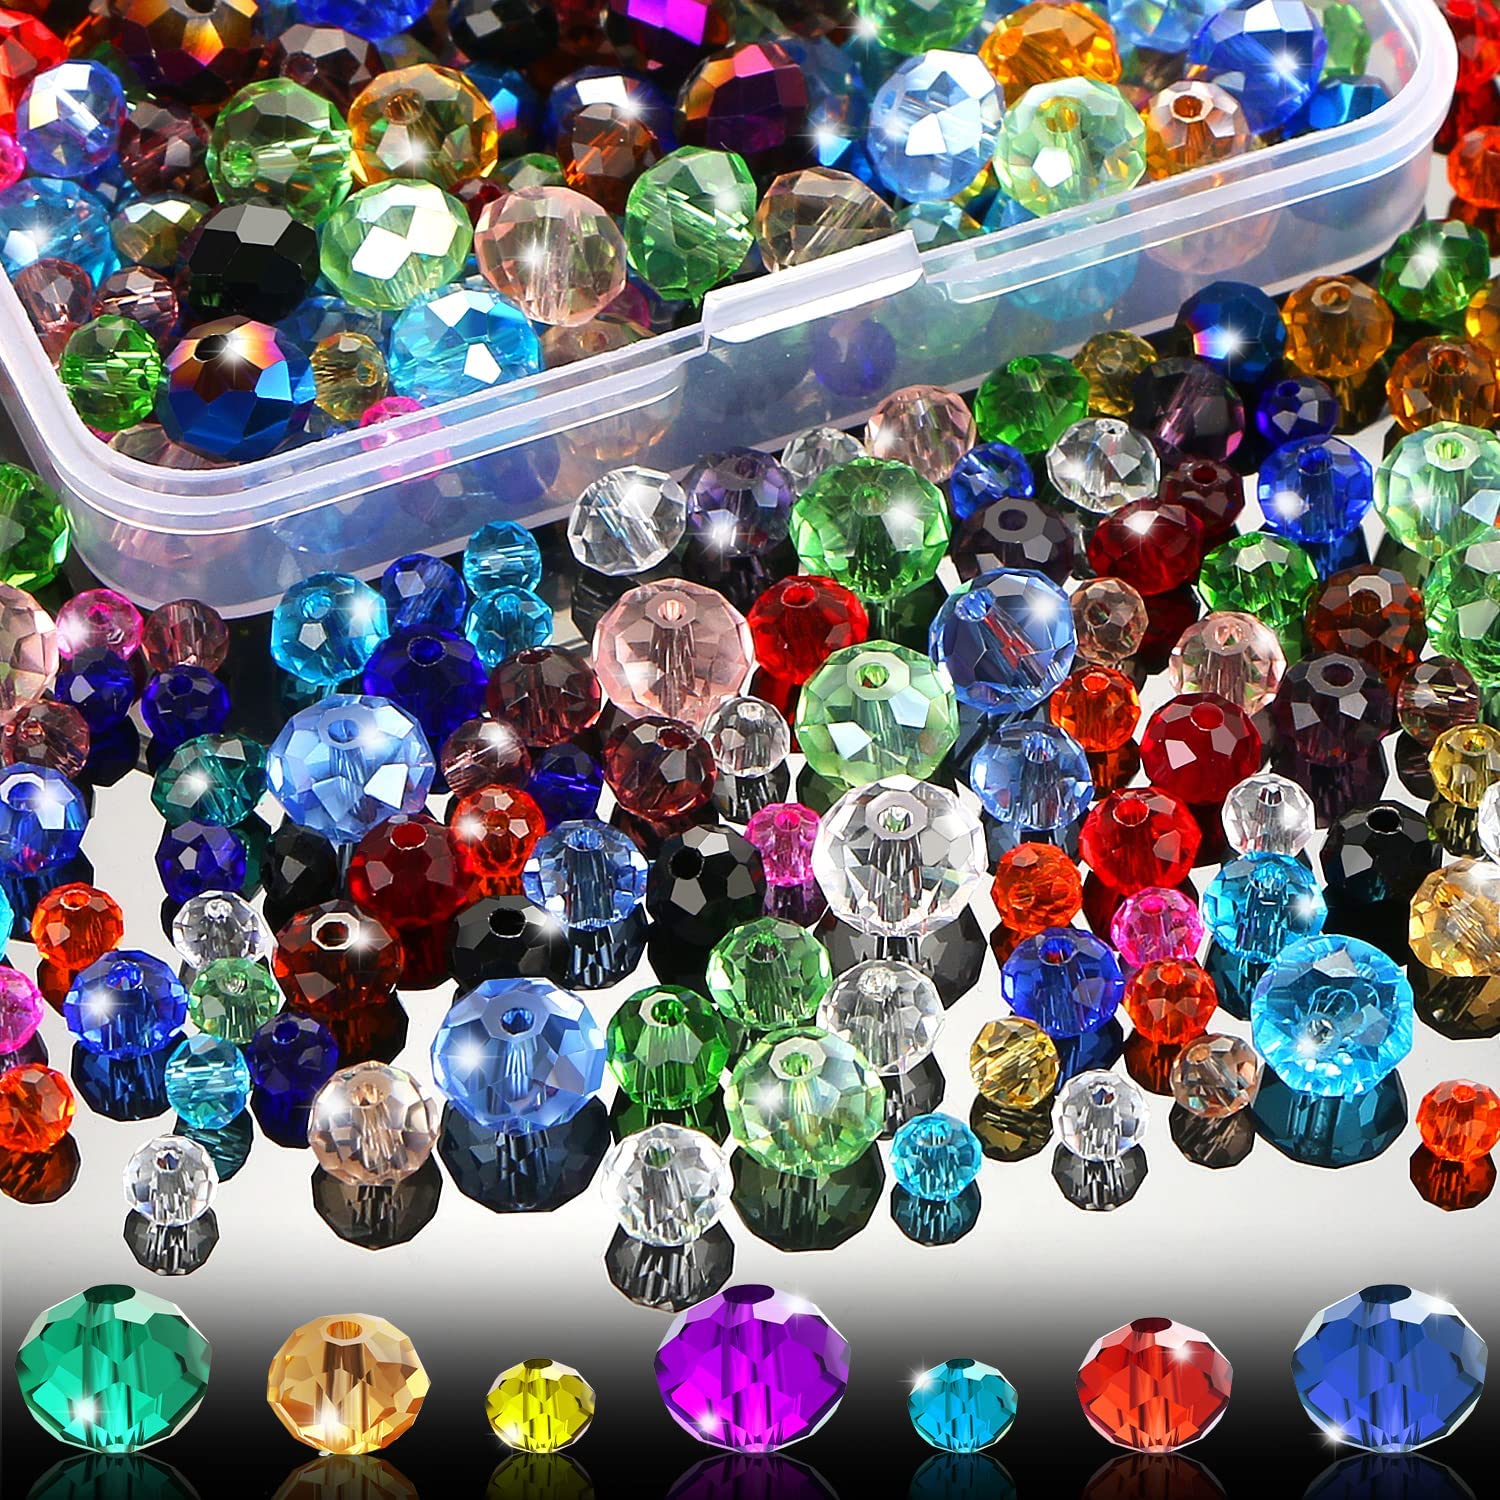 Crystal Glass Beads for Jewelry Making Faceted Shape Assorted Colors with  Container Box, for DIY Art and Craft - blue